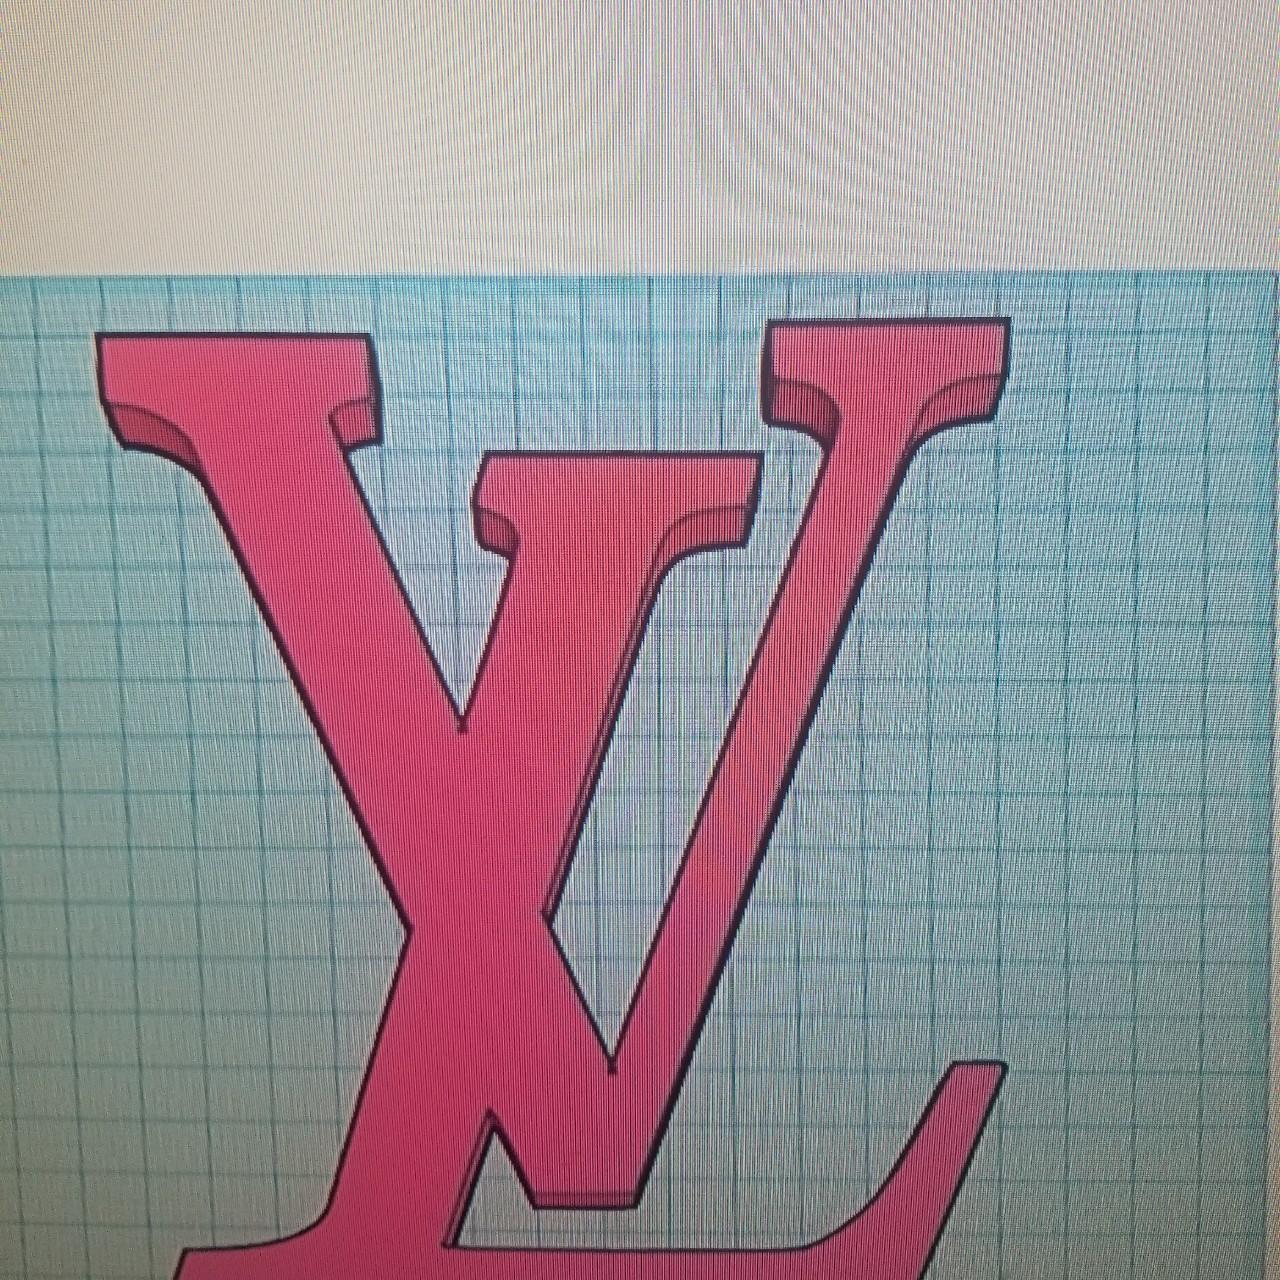 How to draw the Louis Vuitton logo 